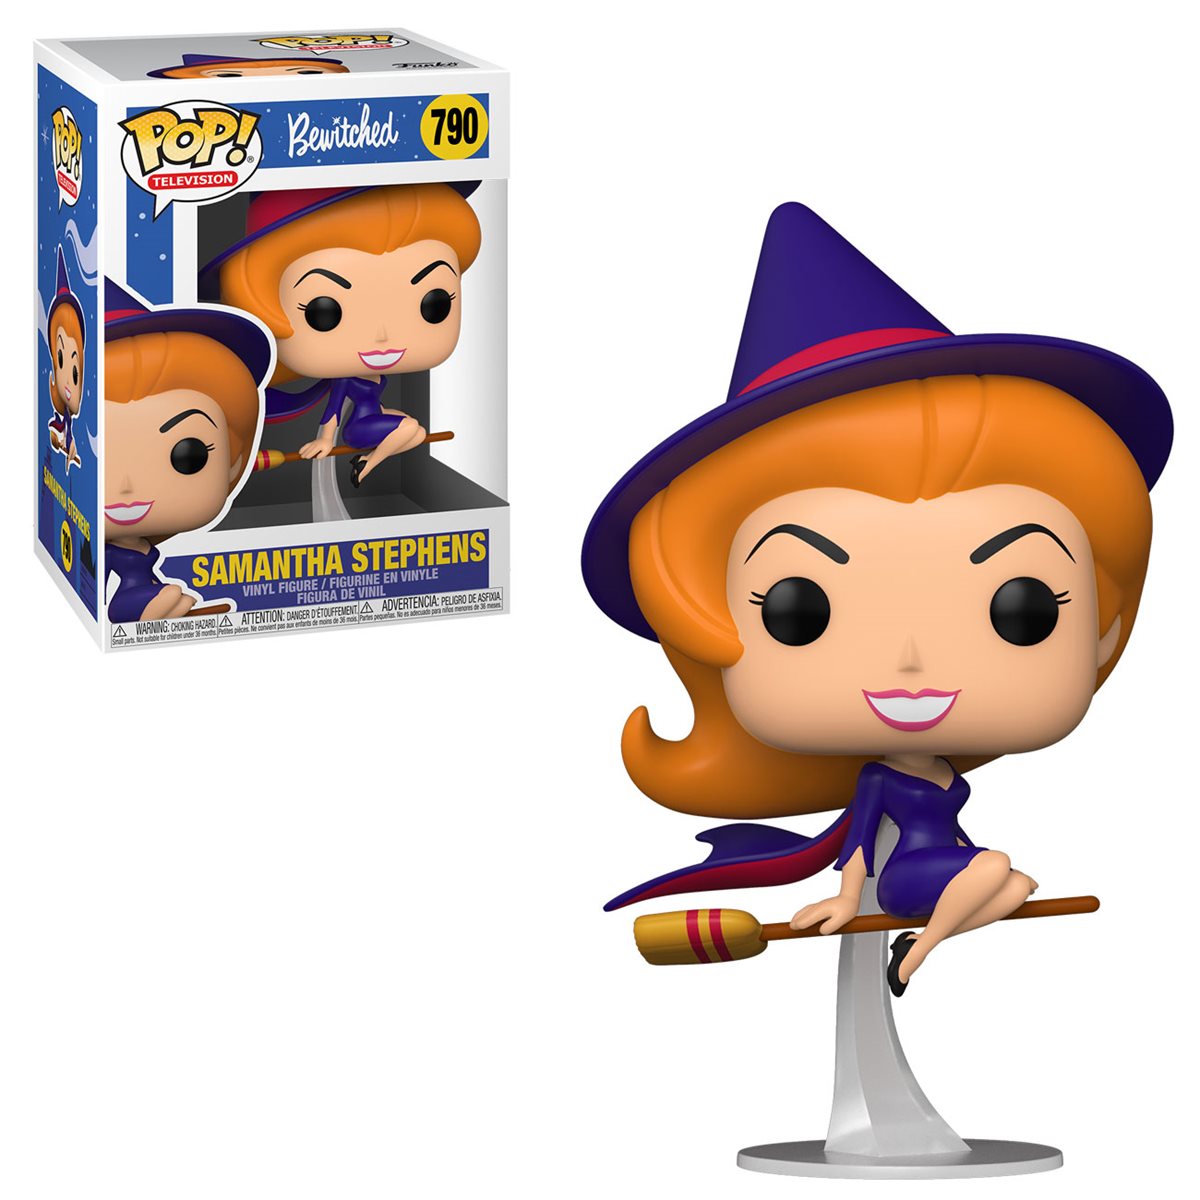 Funko Pop Bewitched Samantha Stephens as Witch Vinyl Figure PREORDER JUNE 